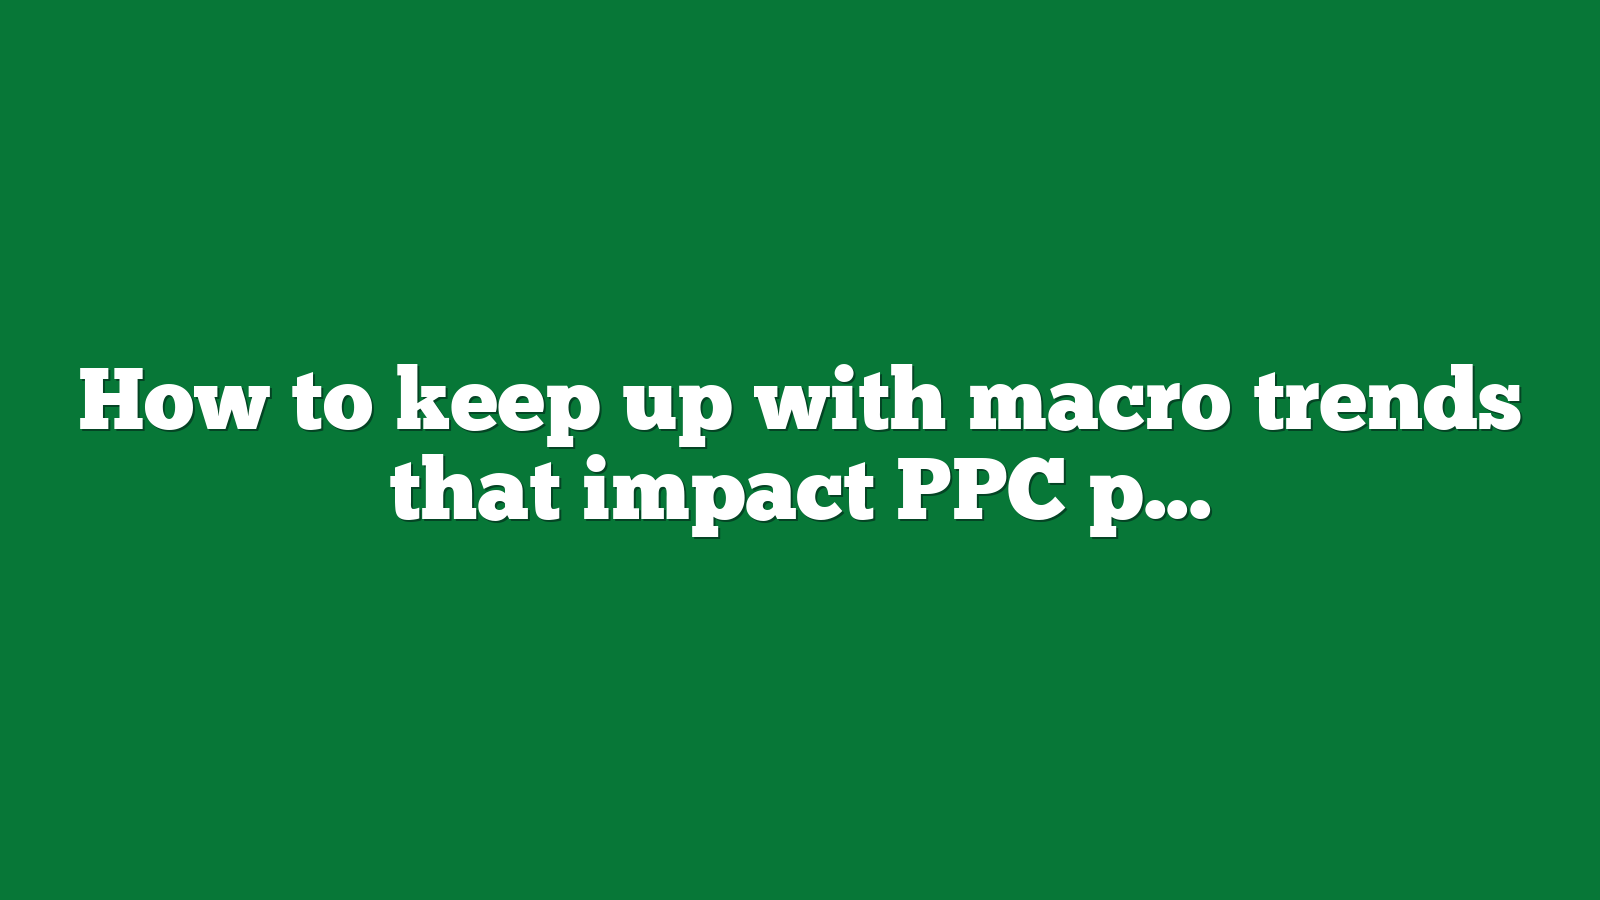 How to keep up with macro trends that impact PPC performance